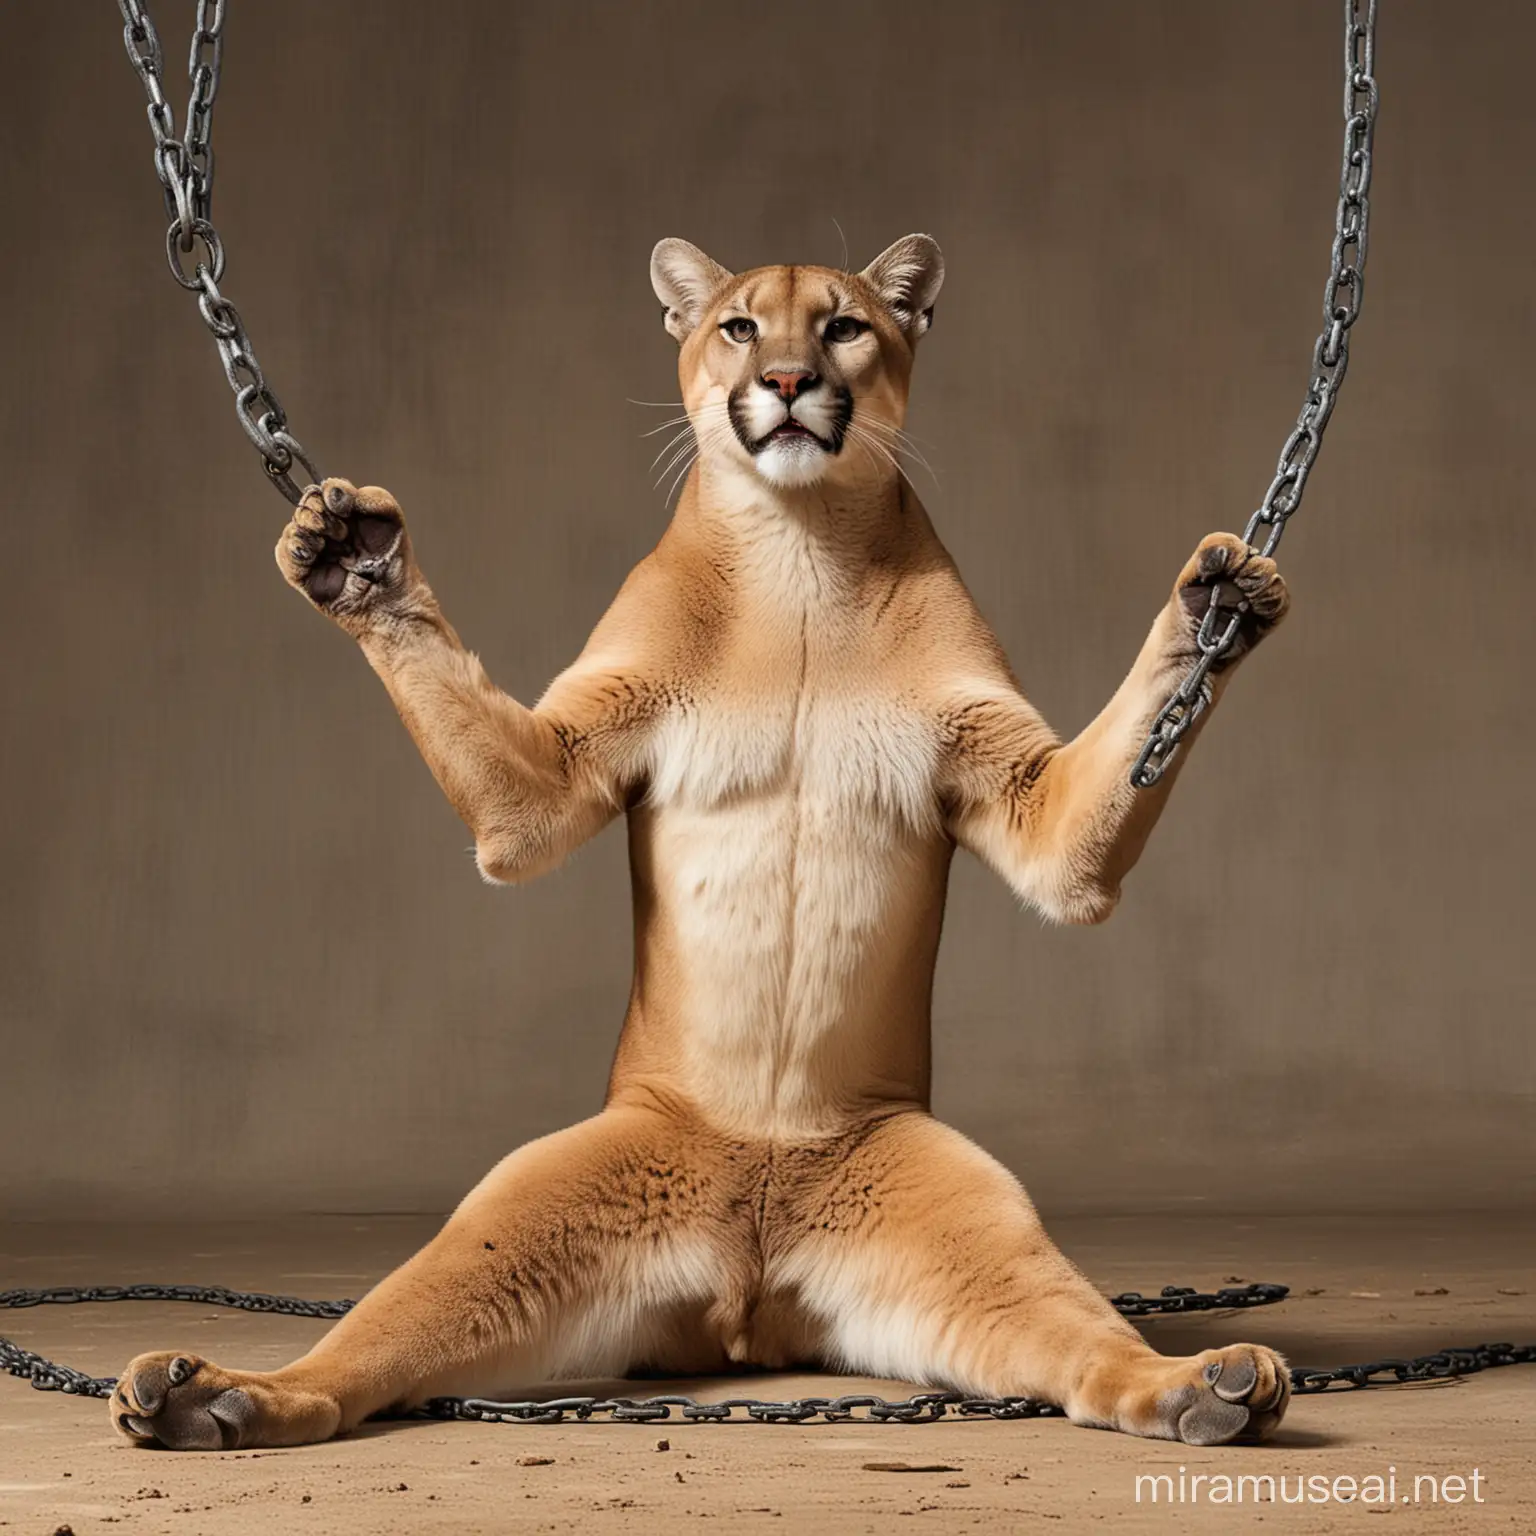 A creature that is a mountain lion from the waist up and a man from the waist down. He is on his knees, arms stretched wide to the sides by chains binding his wrists.